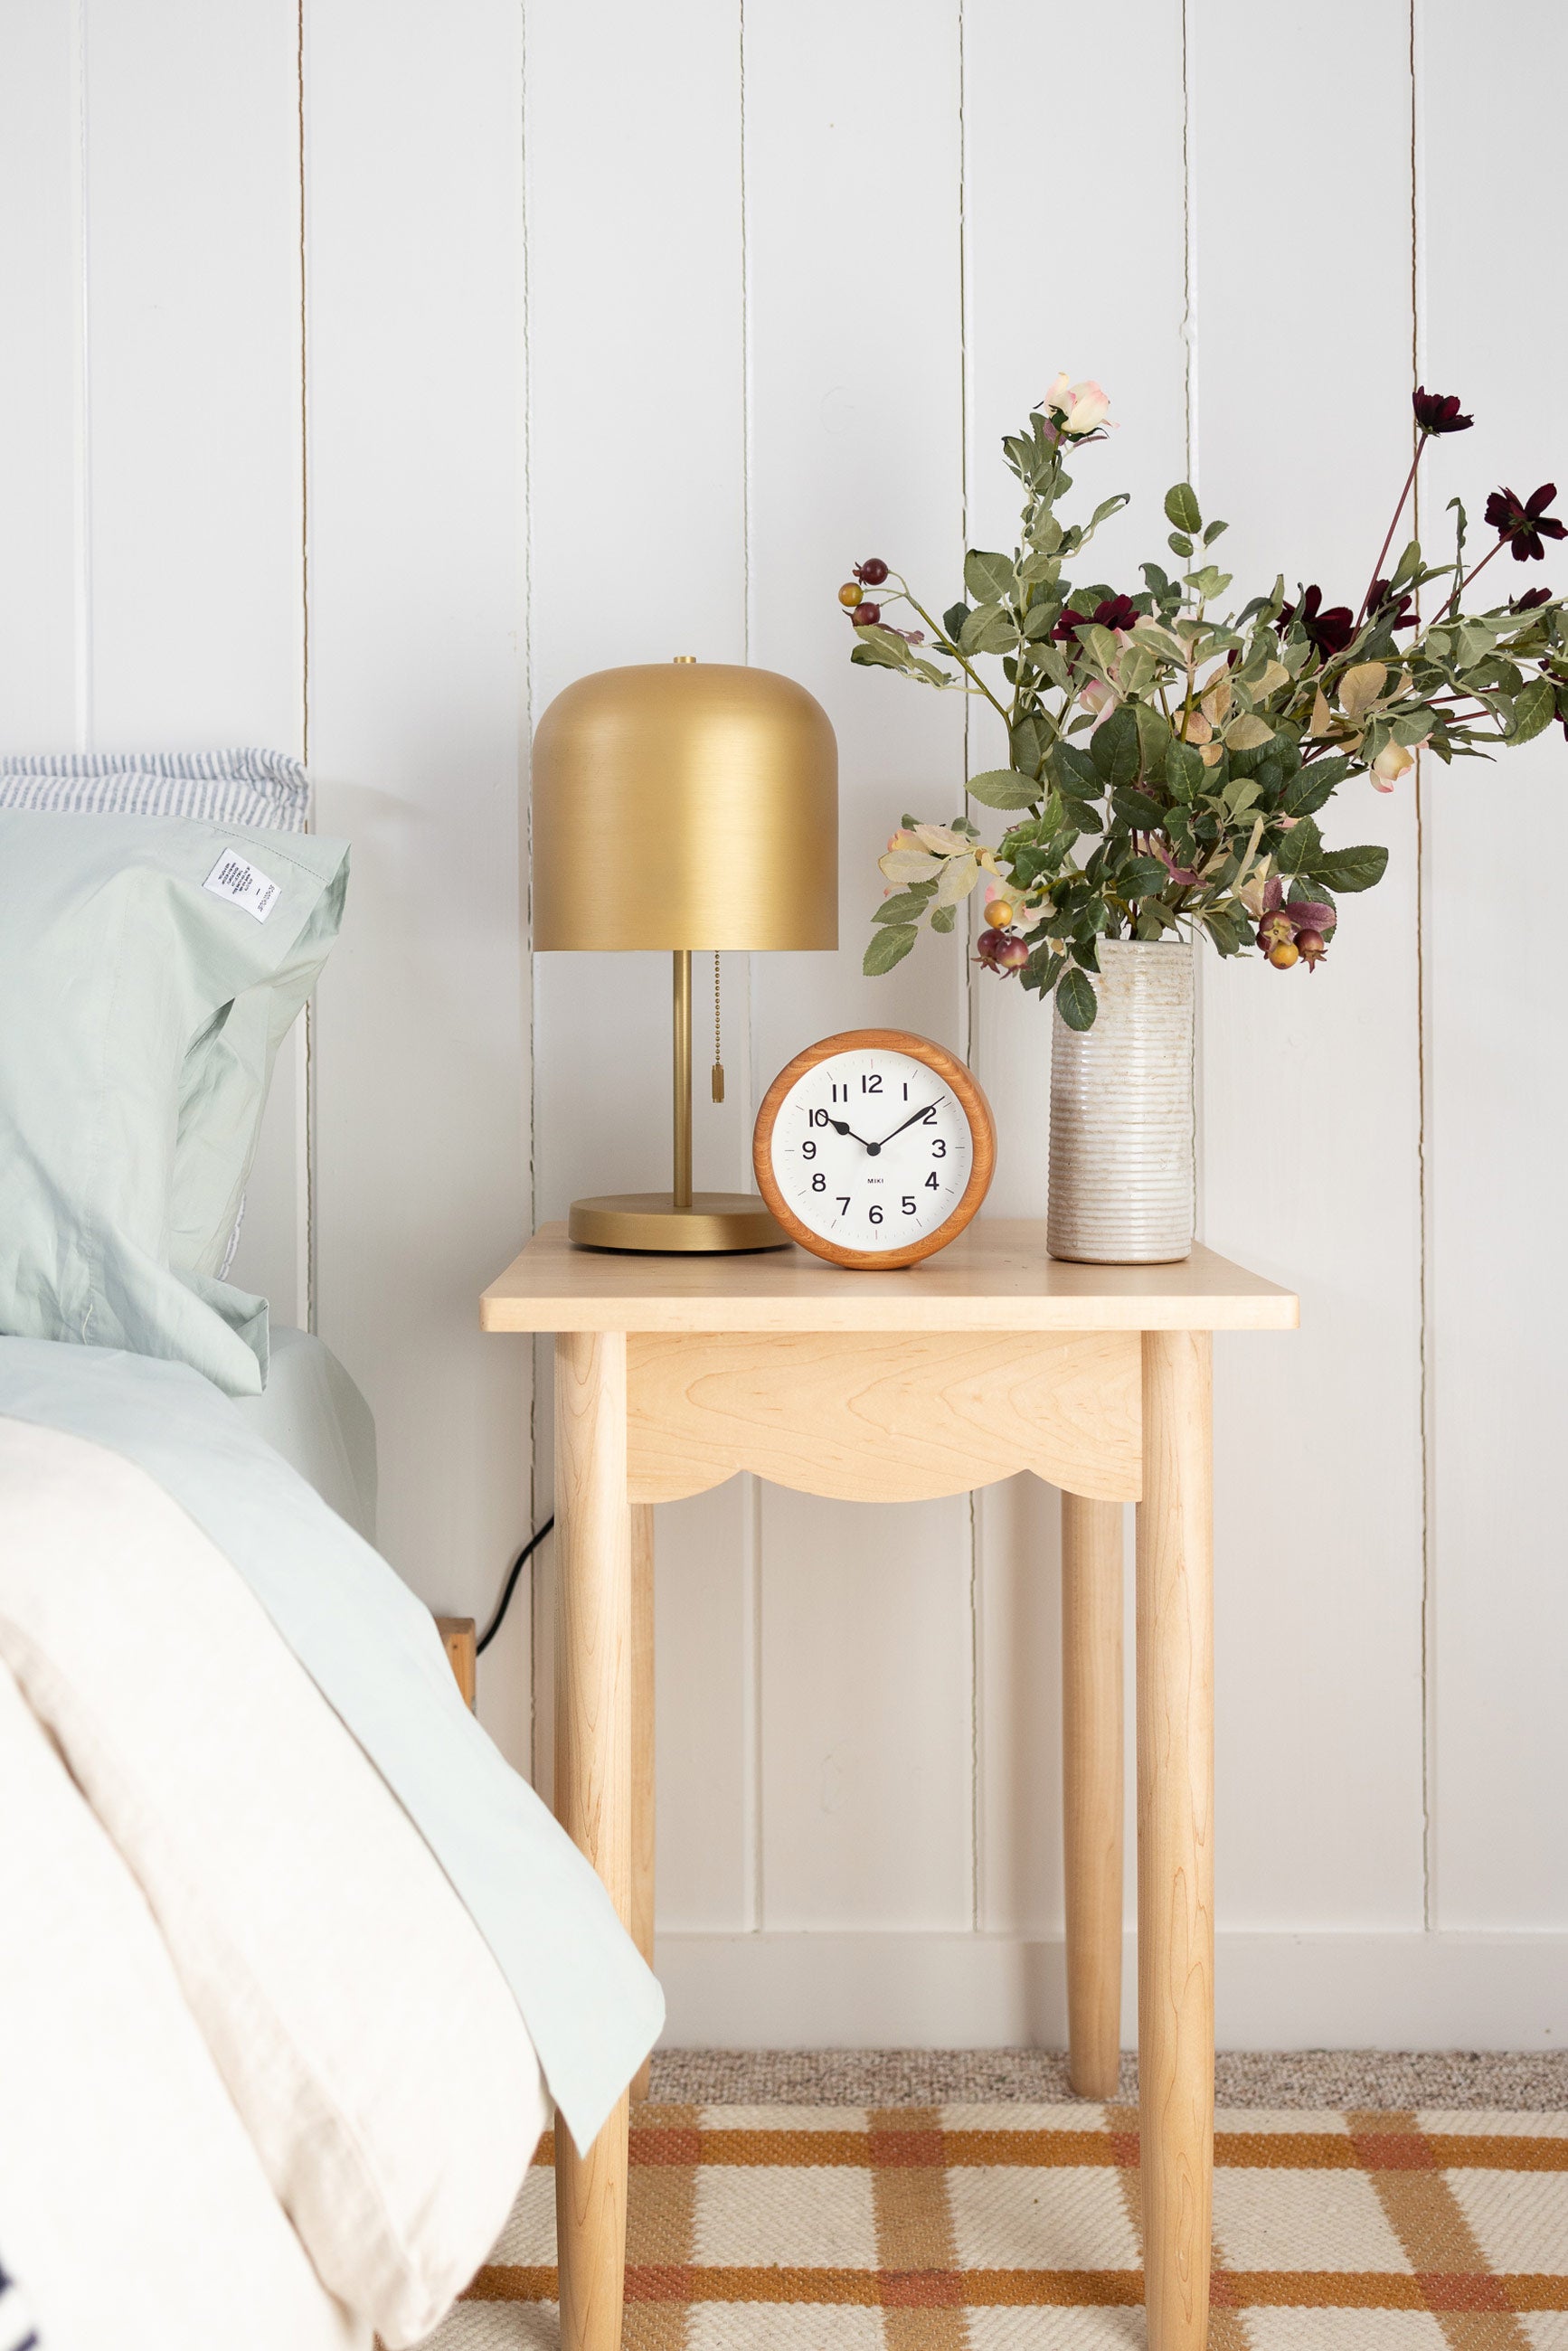 Shaker-style bedside table with brass lamp, small wooden clock, and fresh cut flowers in a white vase